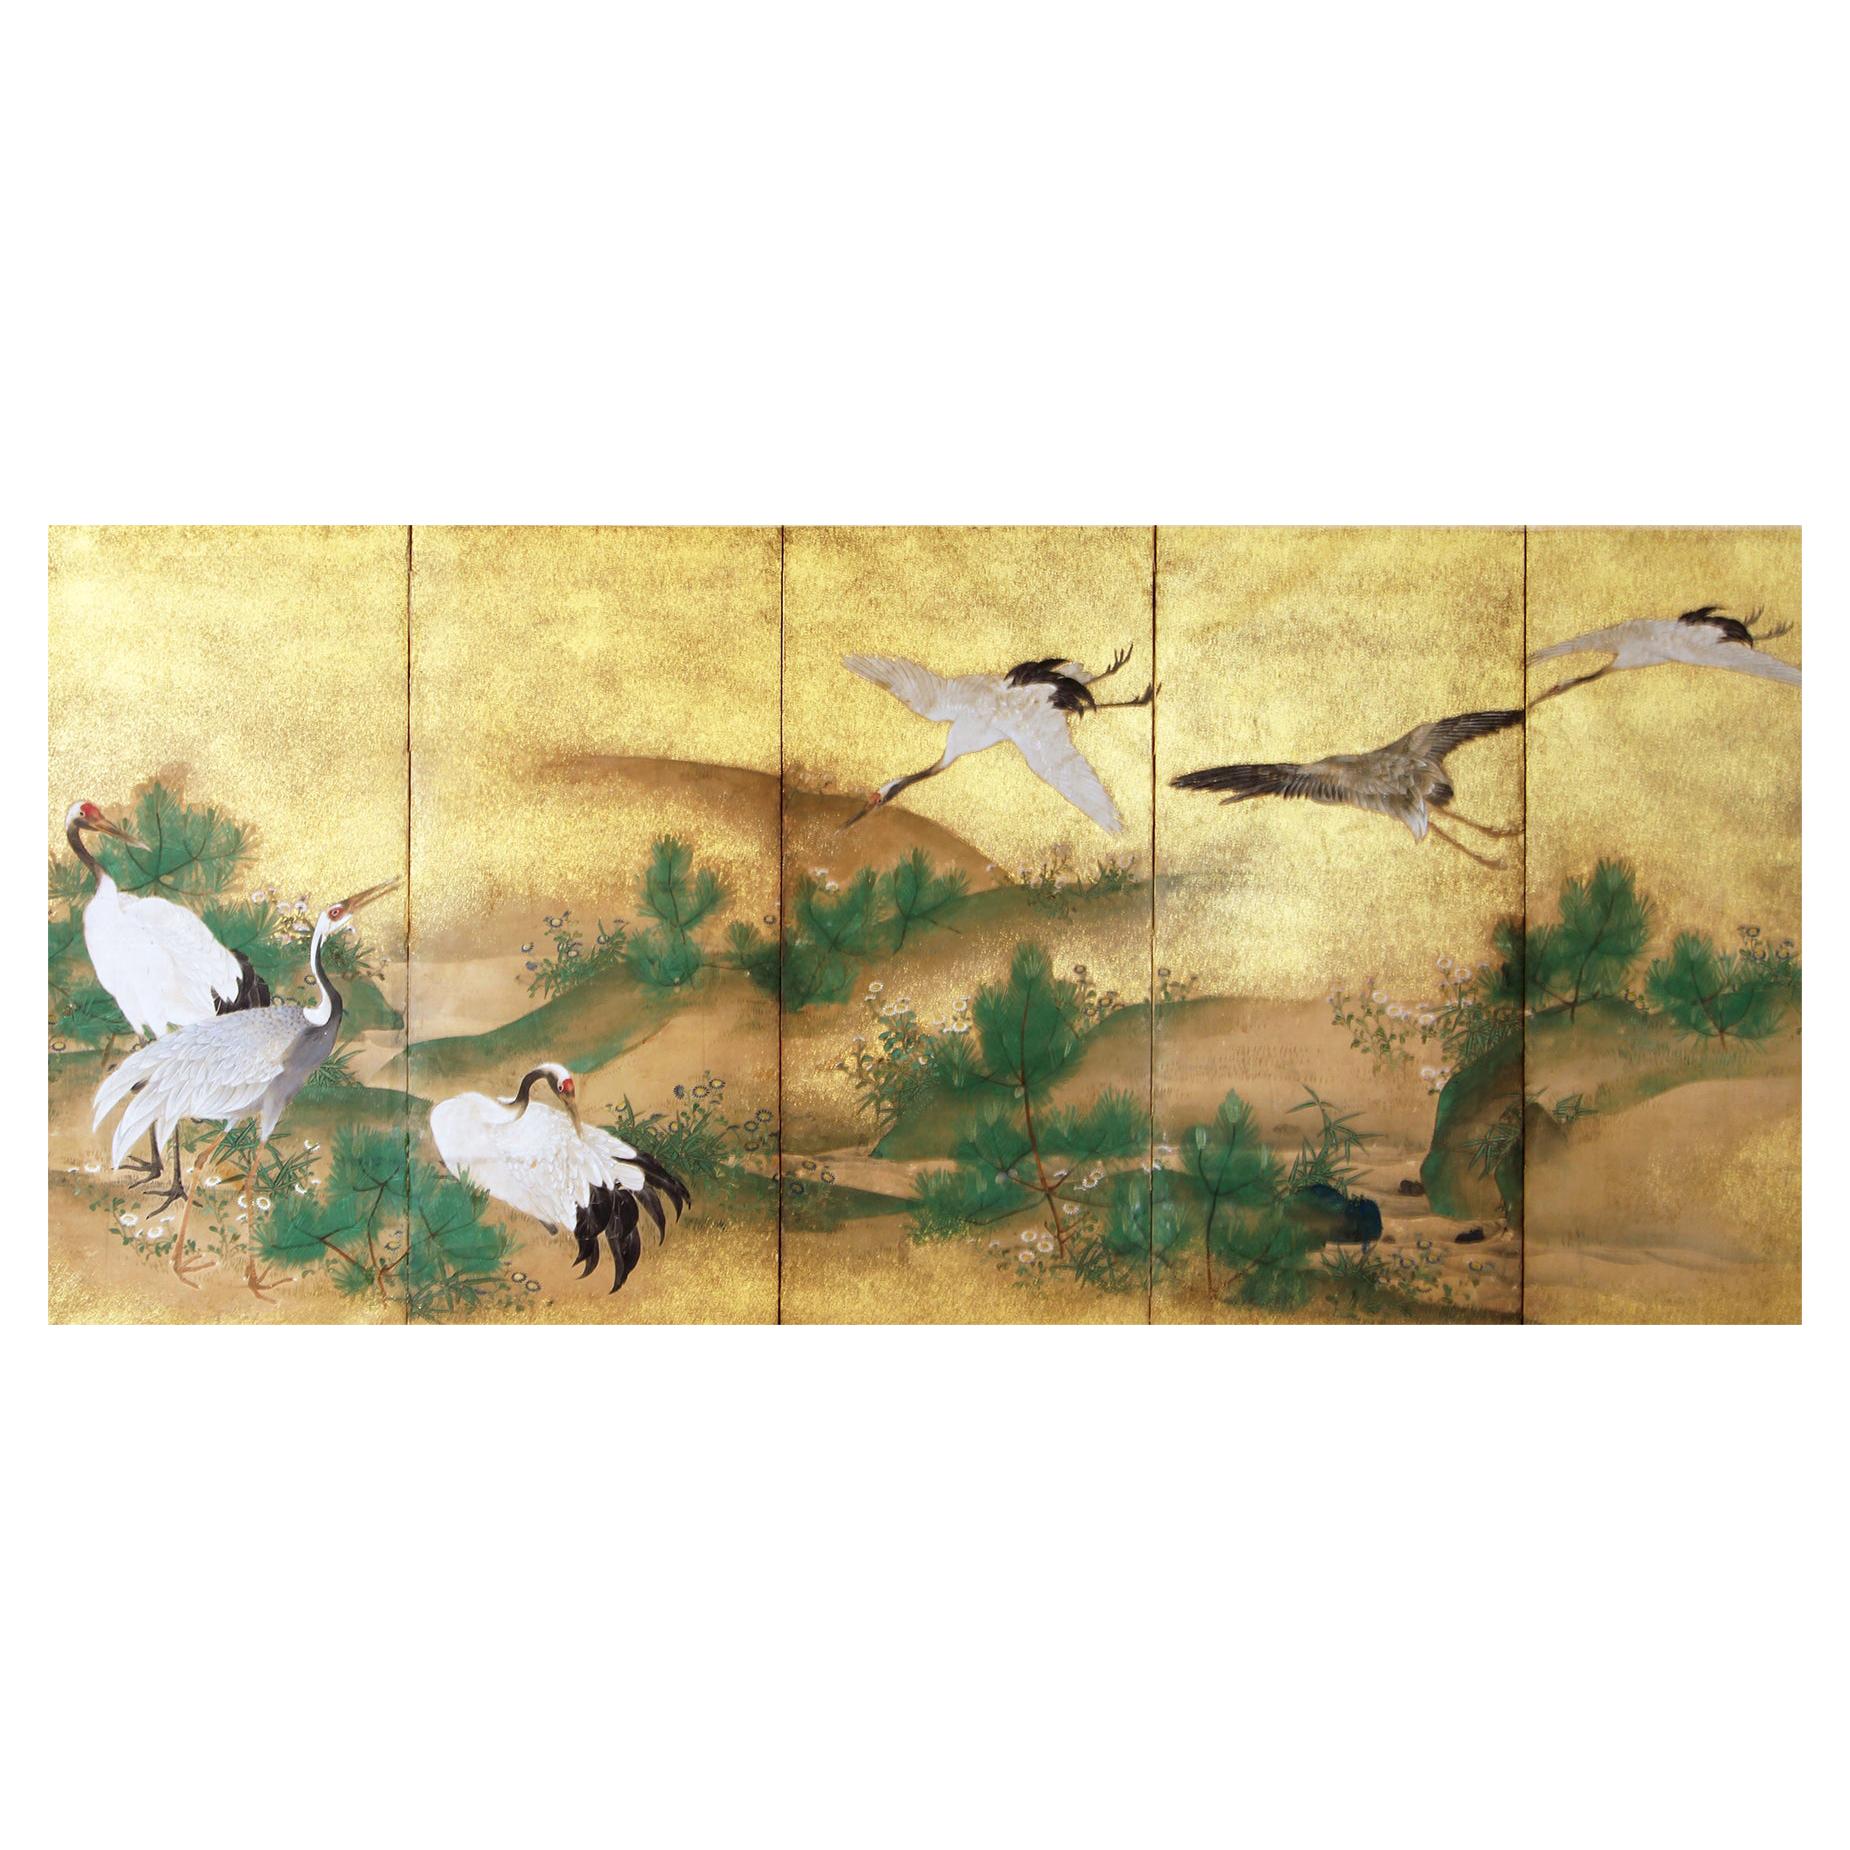 19th Century, Japanese Screen 8 Panels Flying Cranes over the Golden Landscape